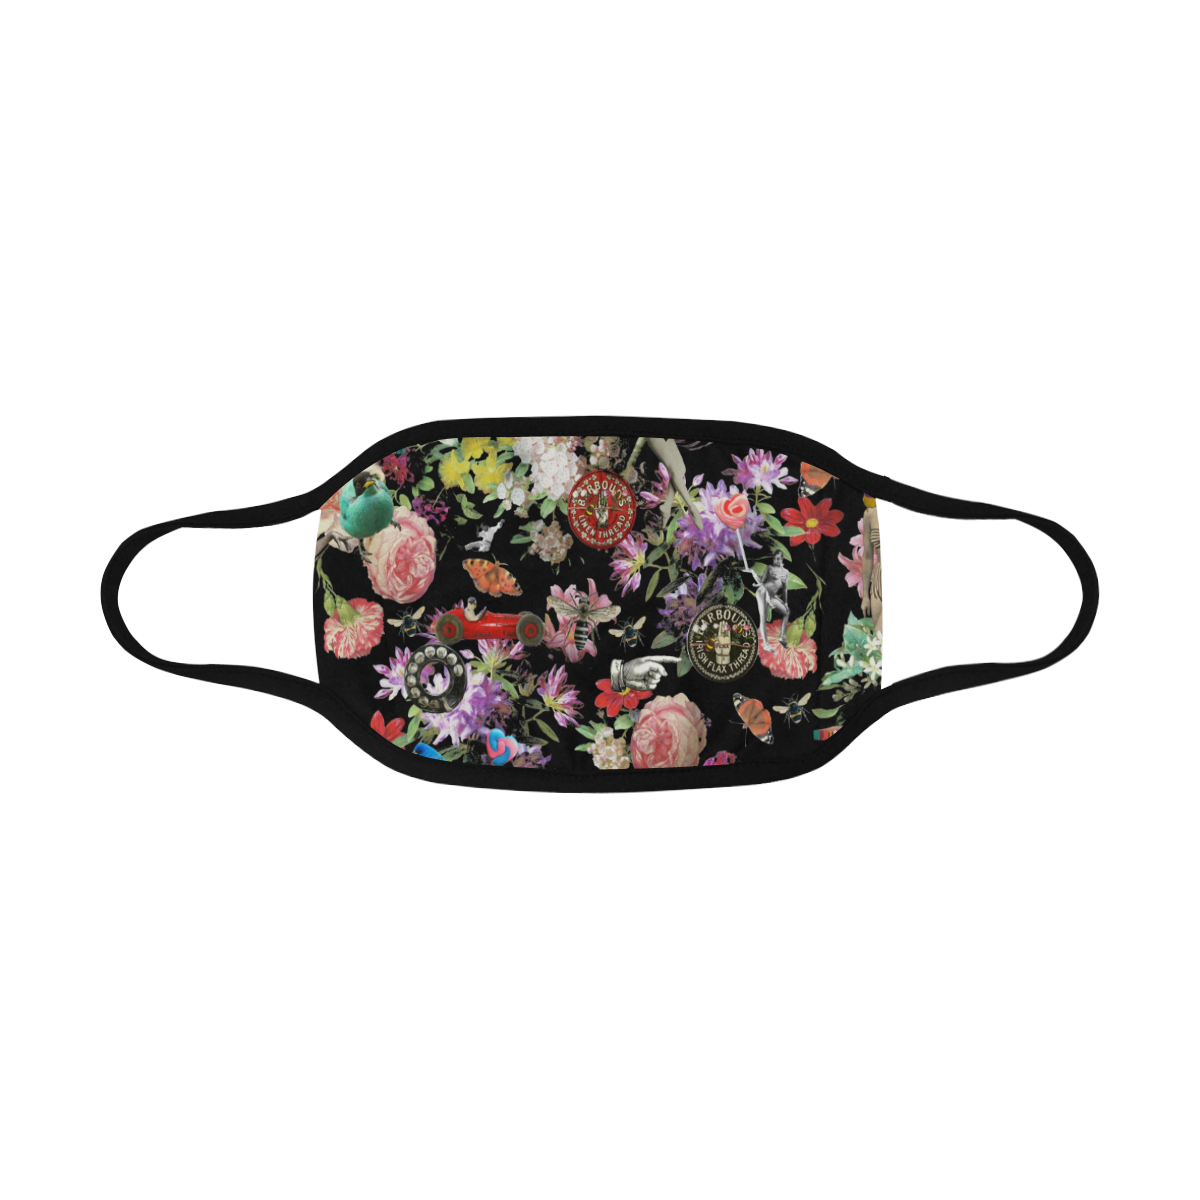 Garden Party Mouth Mask